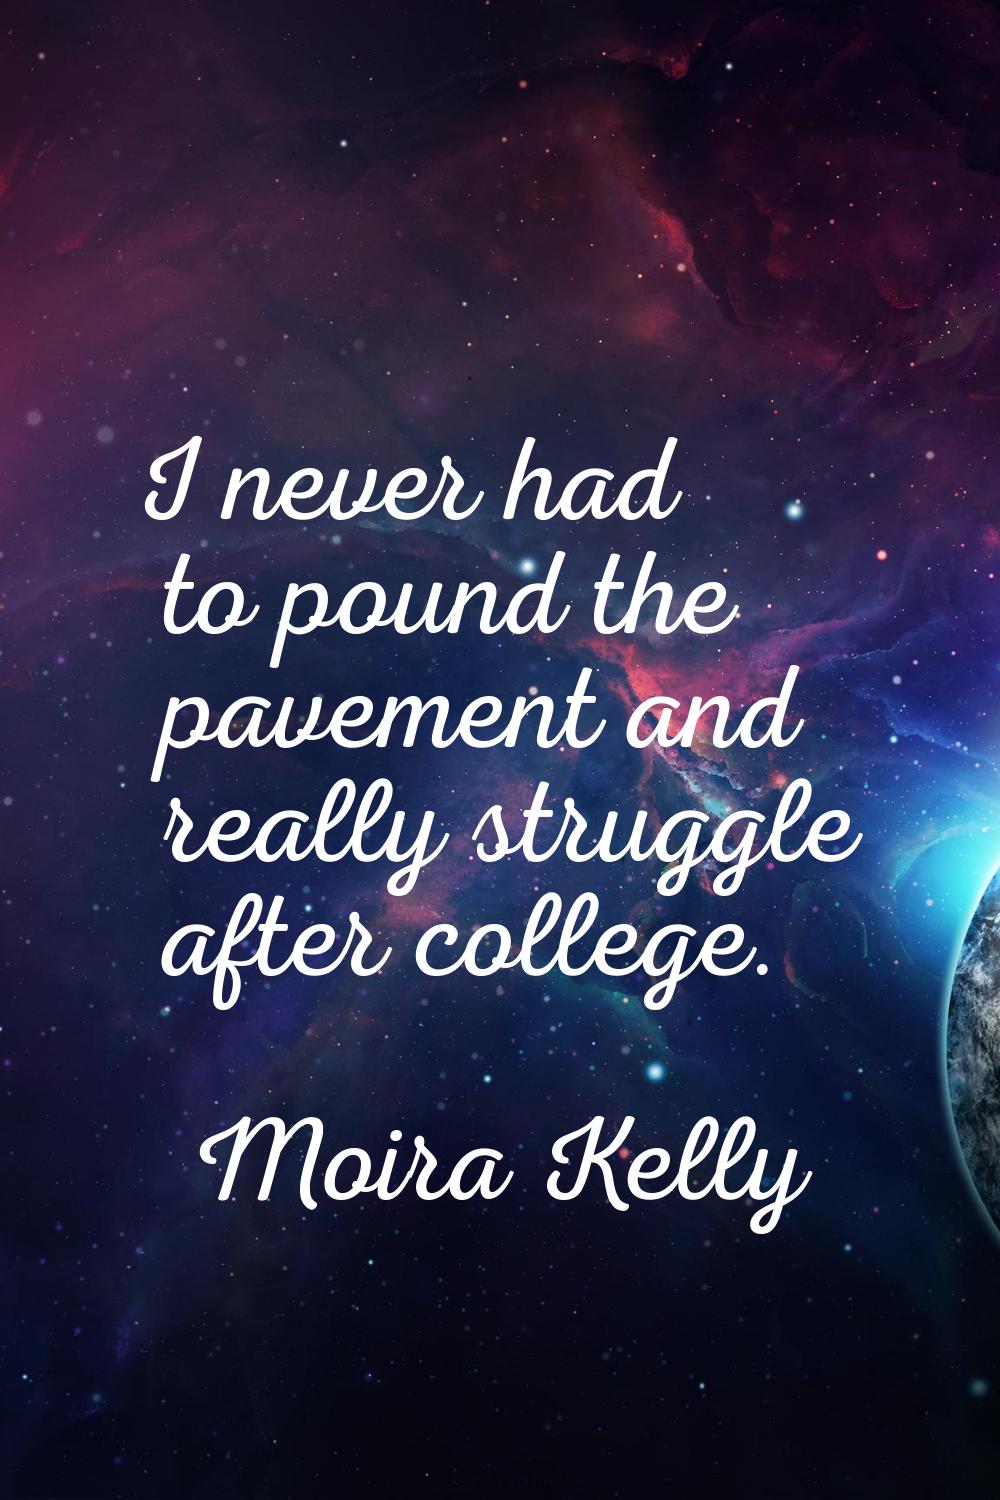 I never had to pound the pavement and really struggle after college.